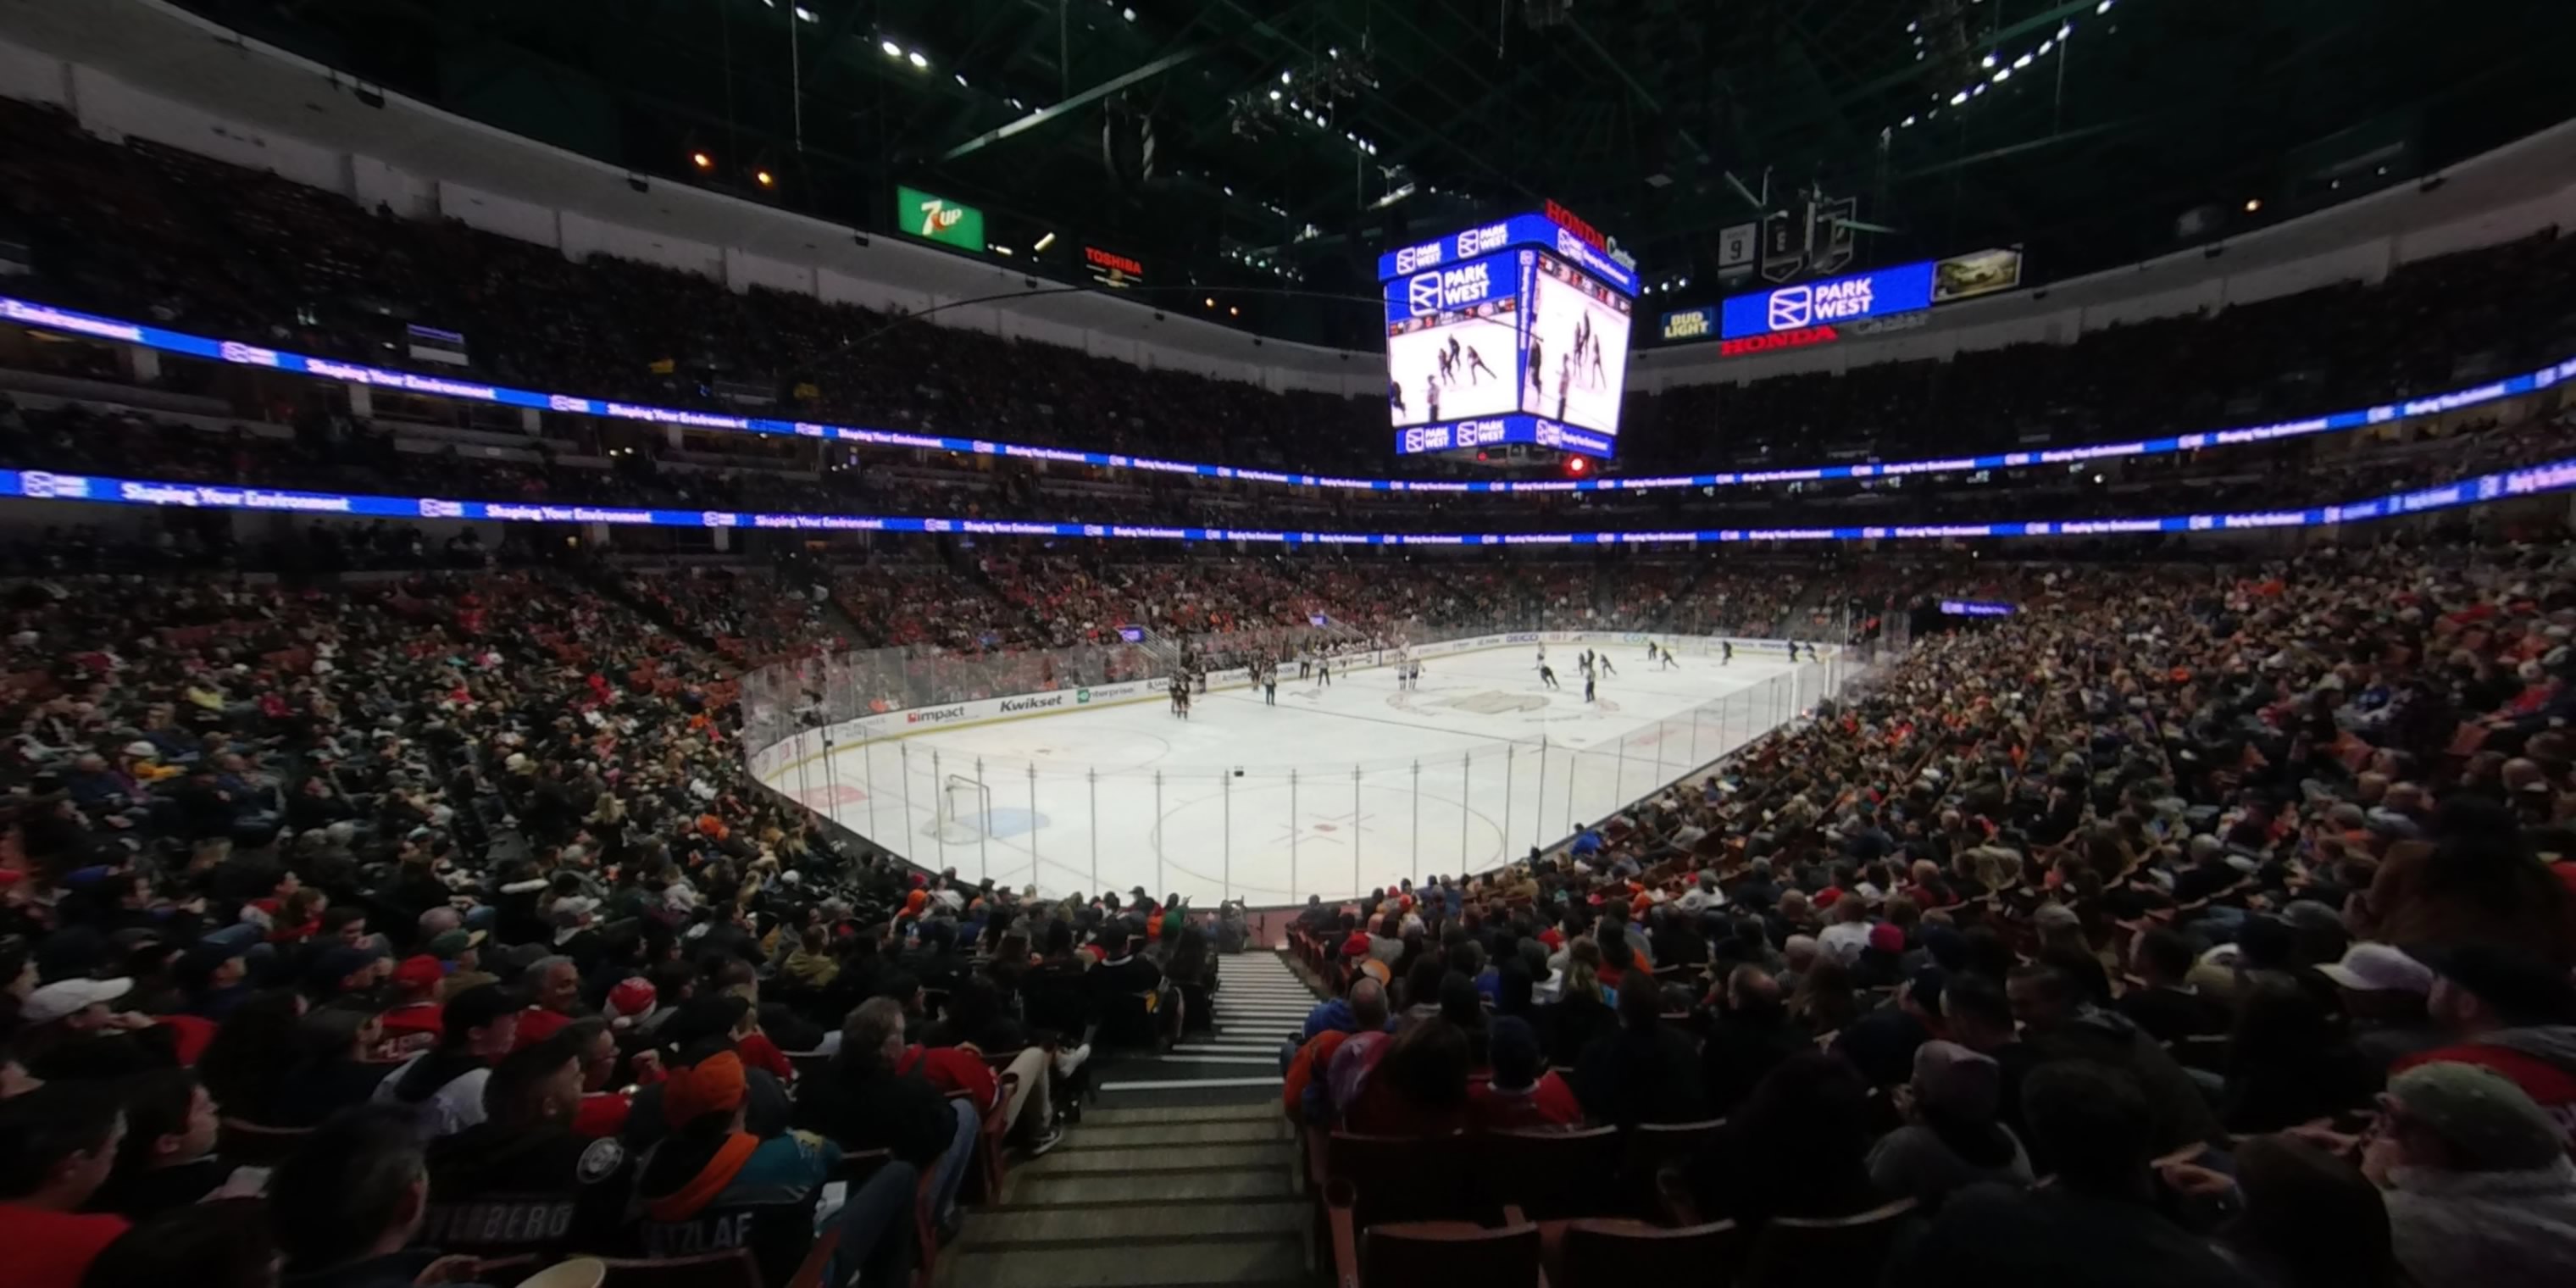 section 226 panoramic seat view  for hockey - honda center